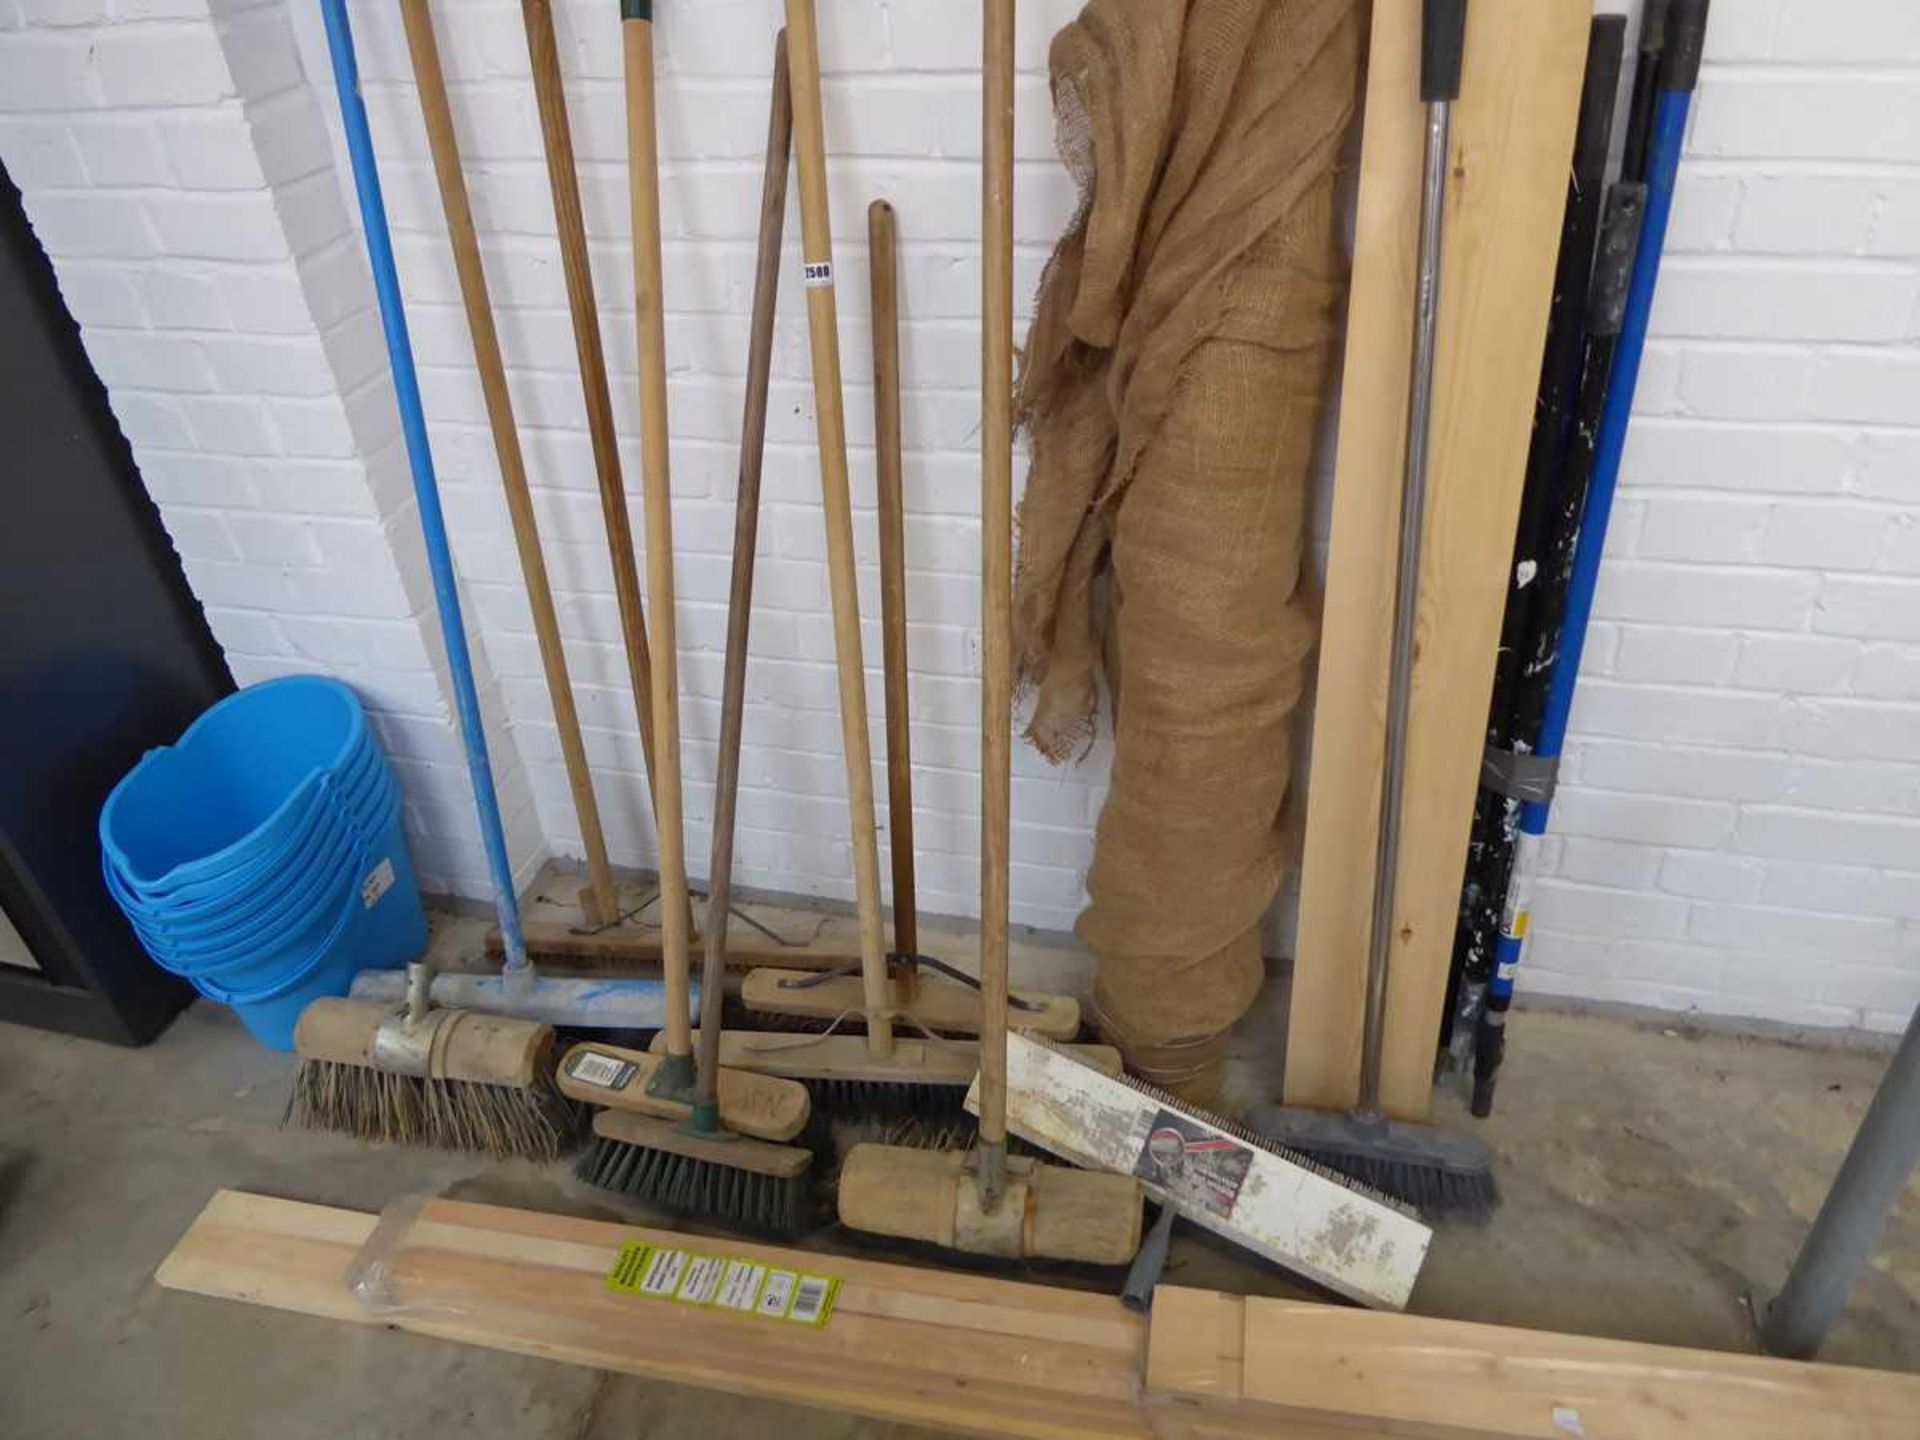 Quantity of various style brushes and brooms, together with roll of hessian, decorators poles etc. - Image 2 of 2